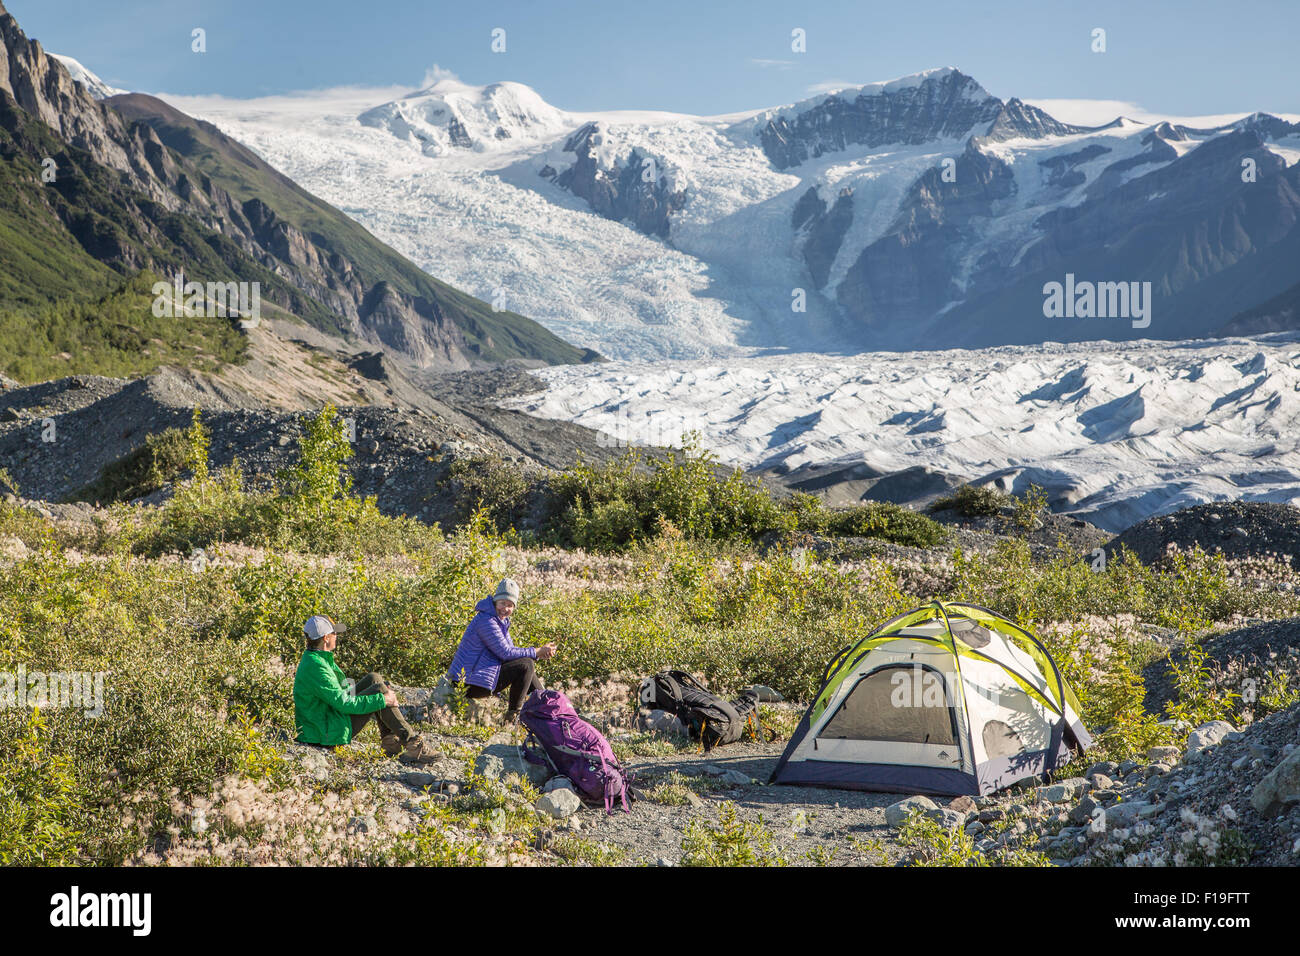 Campers head out on a hike along the Root glacier at Wrangell St. Elias National Park July 20, 2015 in Alaska. Stock Photo